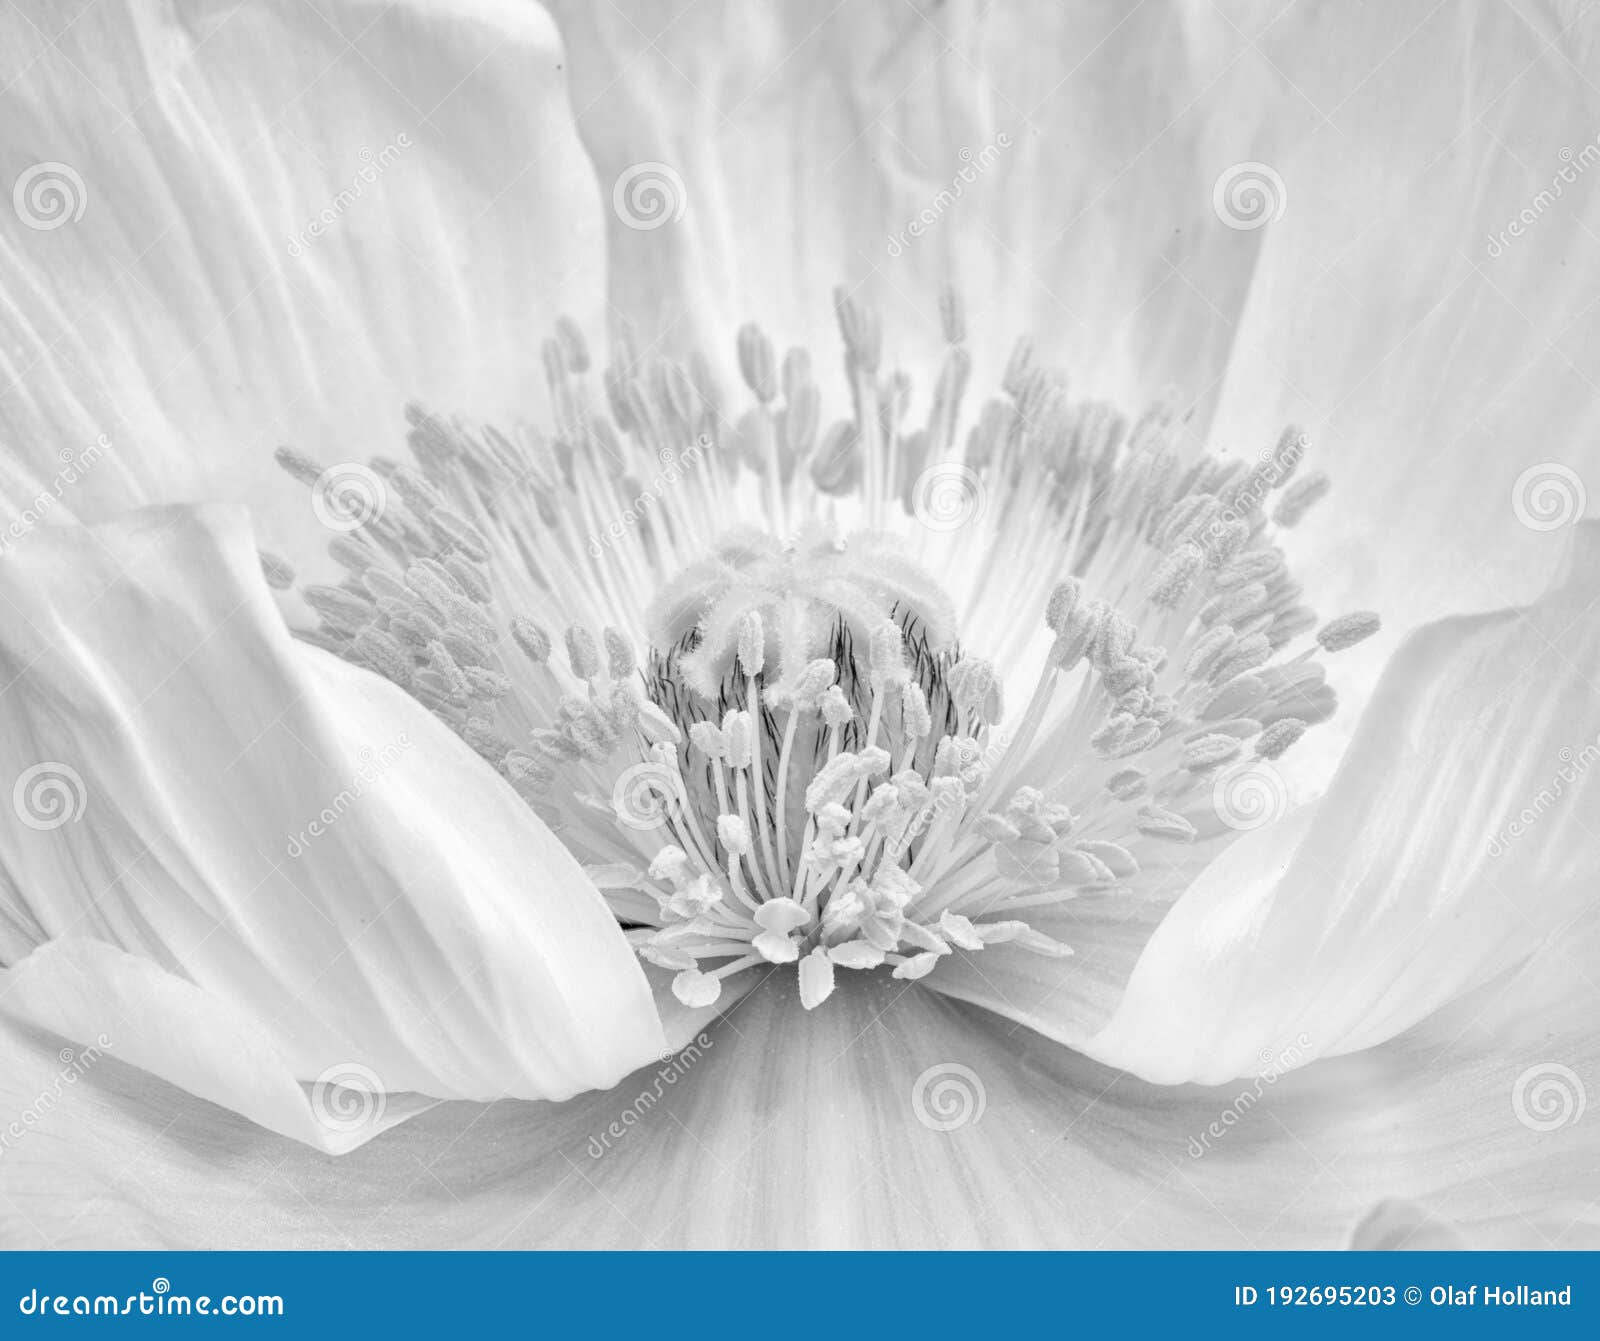 Monochrome High Key Macro of the Inner of a Poppy Blossom with